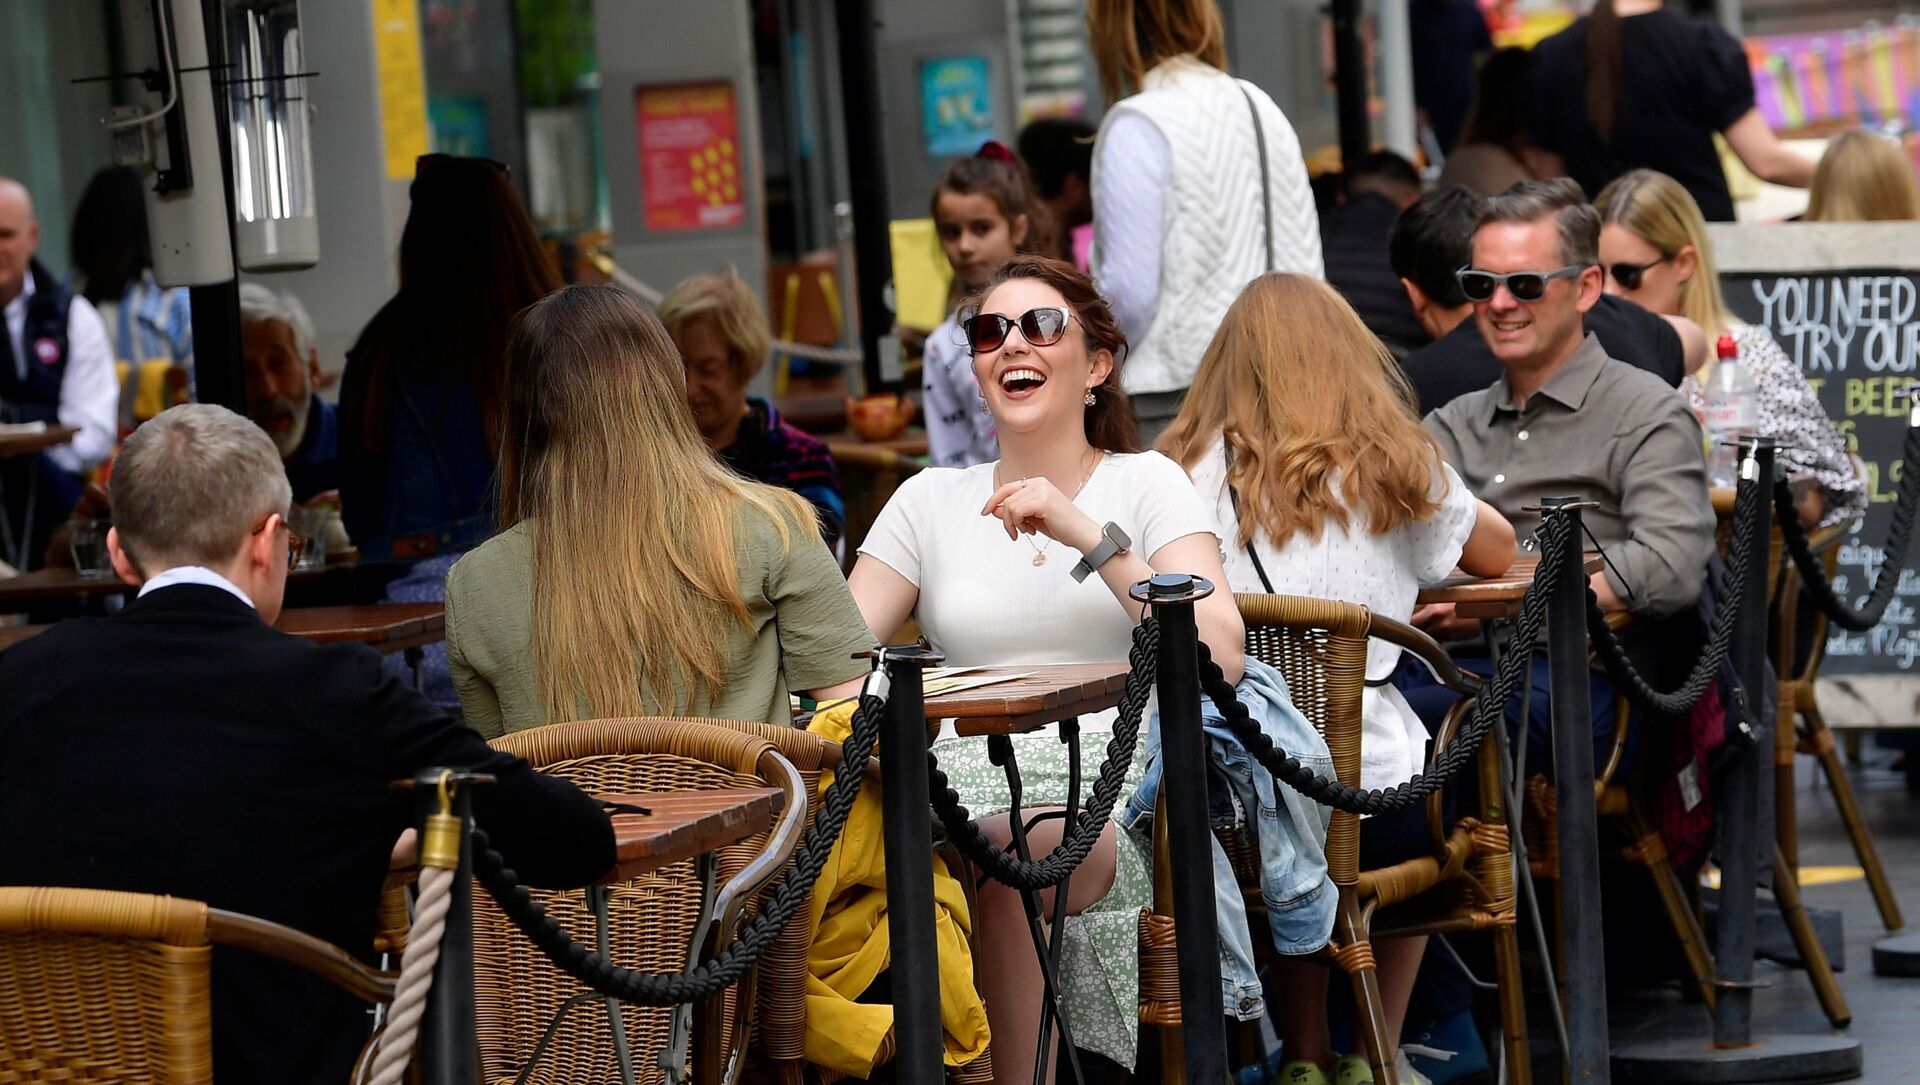 People relax at outdoor dining areas on the South Bank, as lockdown restrictions continue to ease amidst the spread of the coronavirus disease (COVID-19) pandemic, in London, Britain May 28, 2021 - Sputnik International, 1920, 02.06.2021